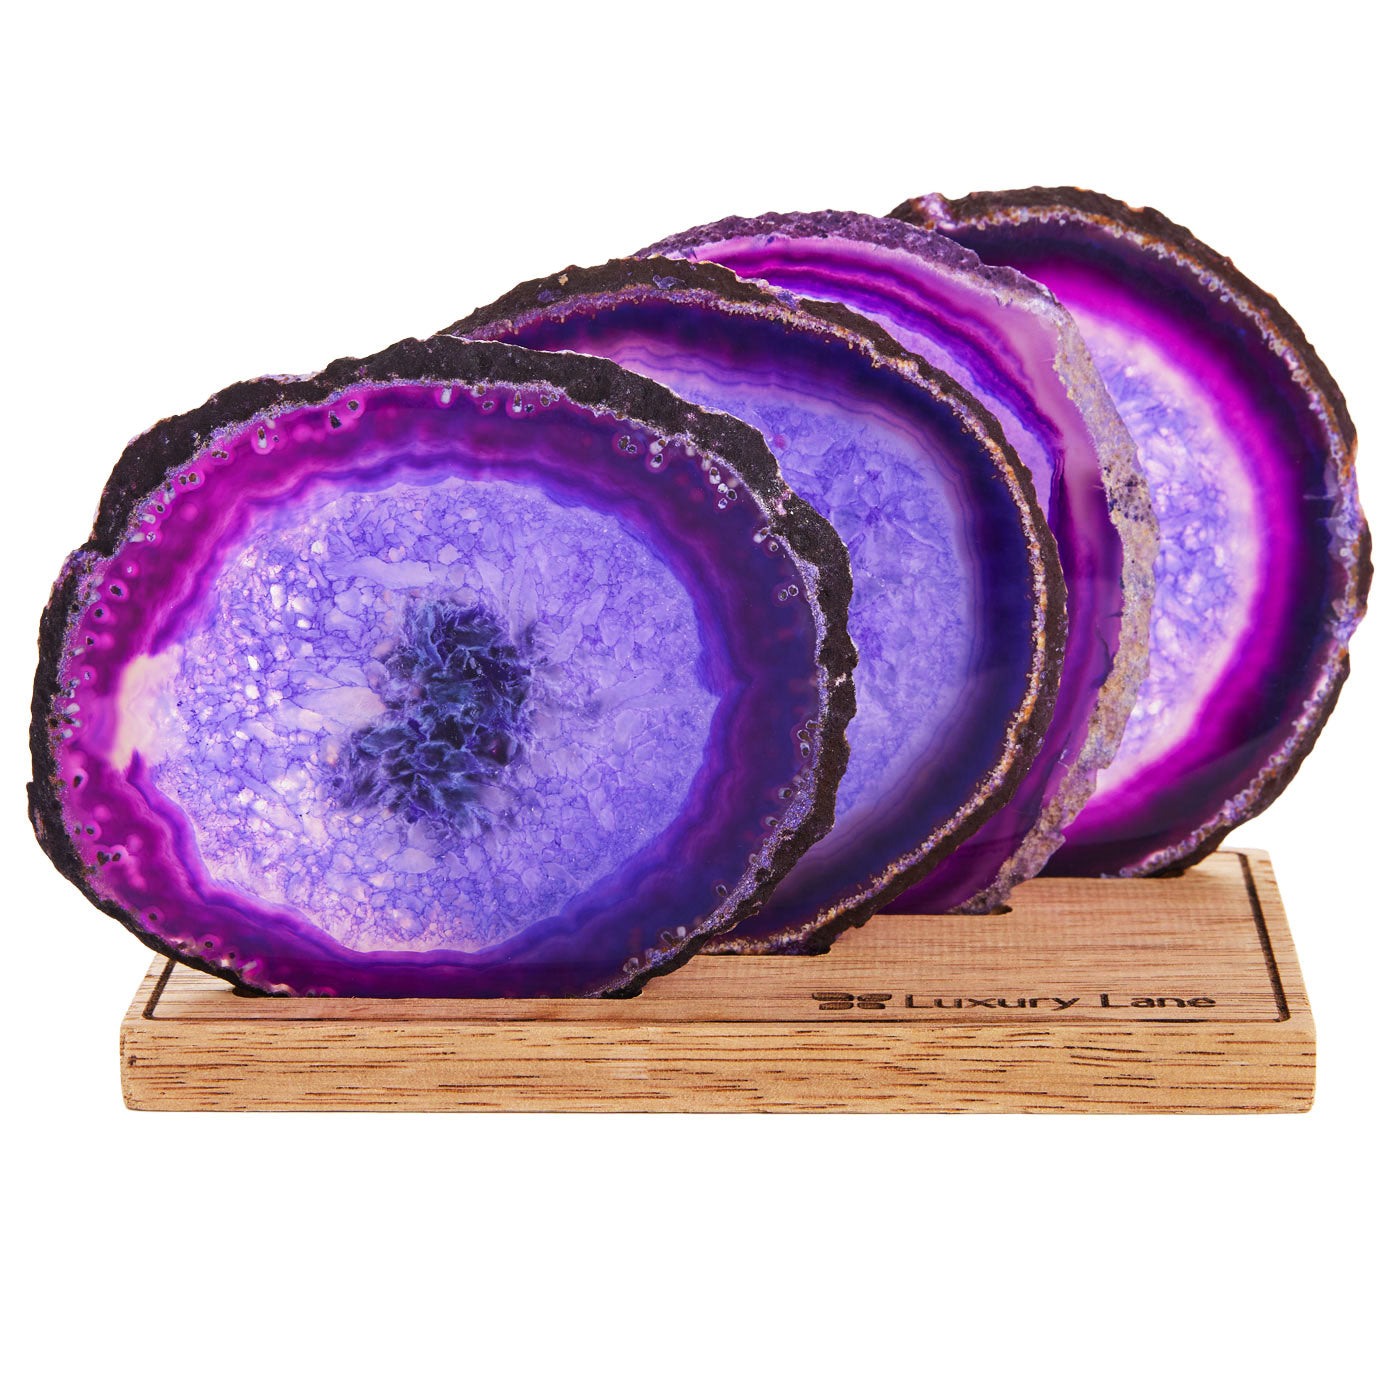 Set of 4 Natural Brazilian Agate Drink Coasters with Wood Holder - Amethyst